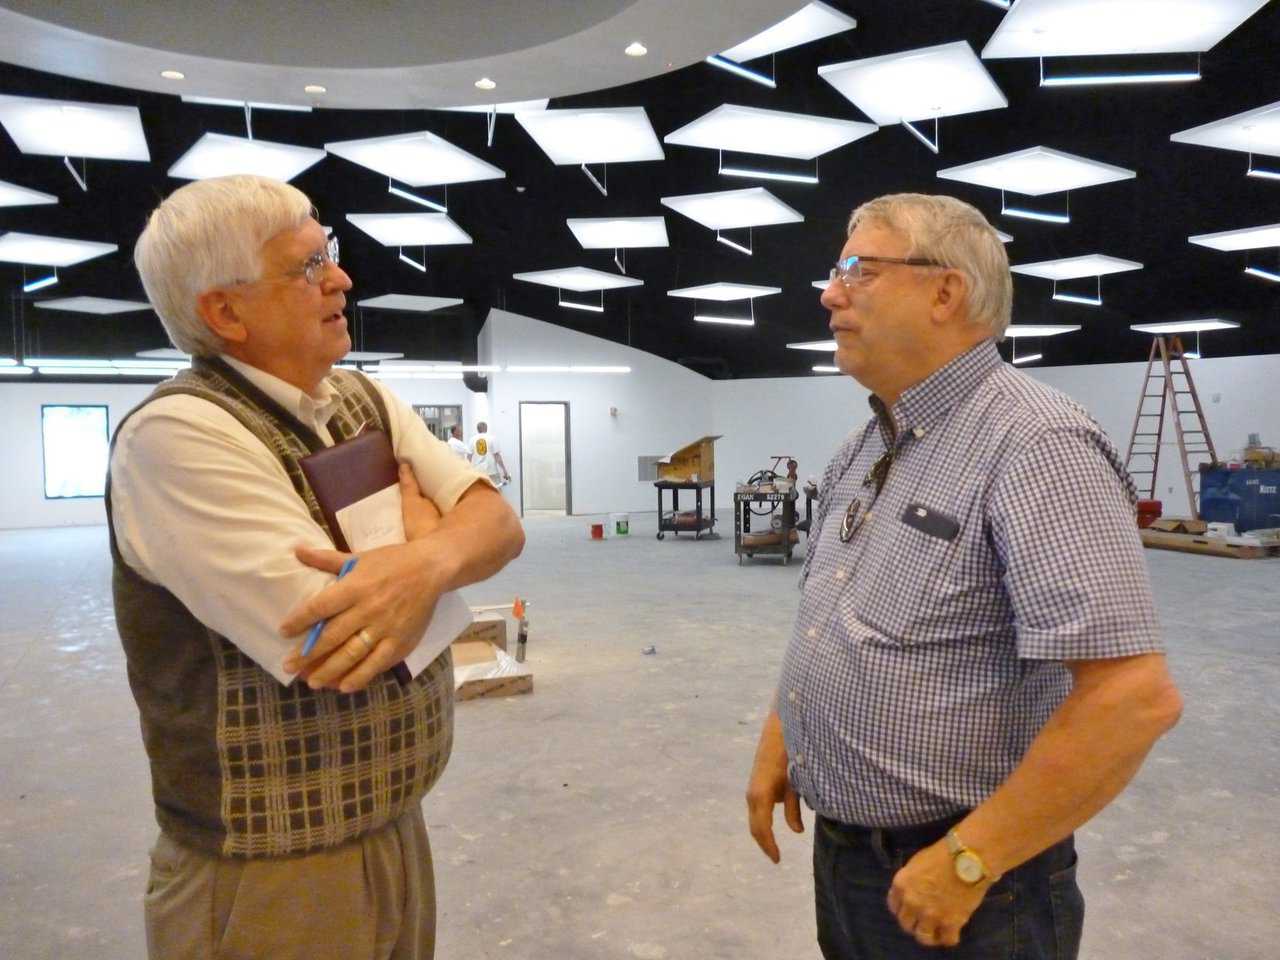 Kasson Library director Art Tiff speaks with architect Leland Gray